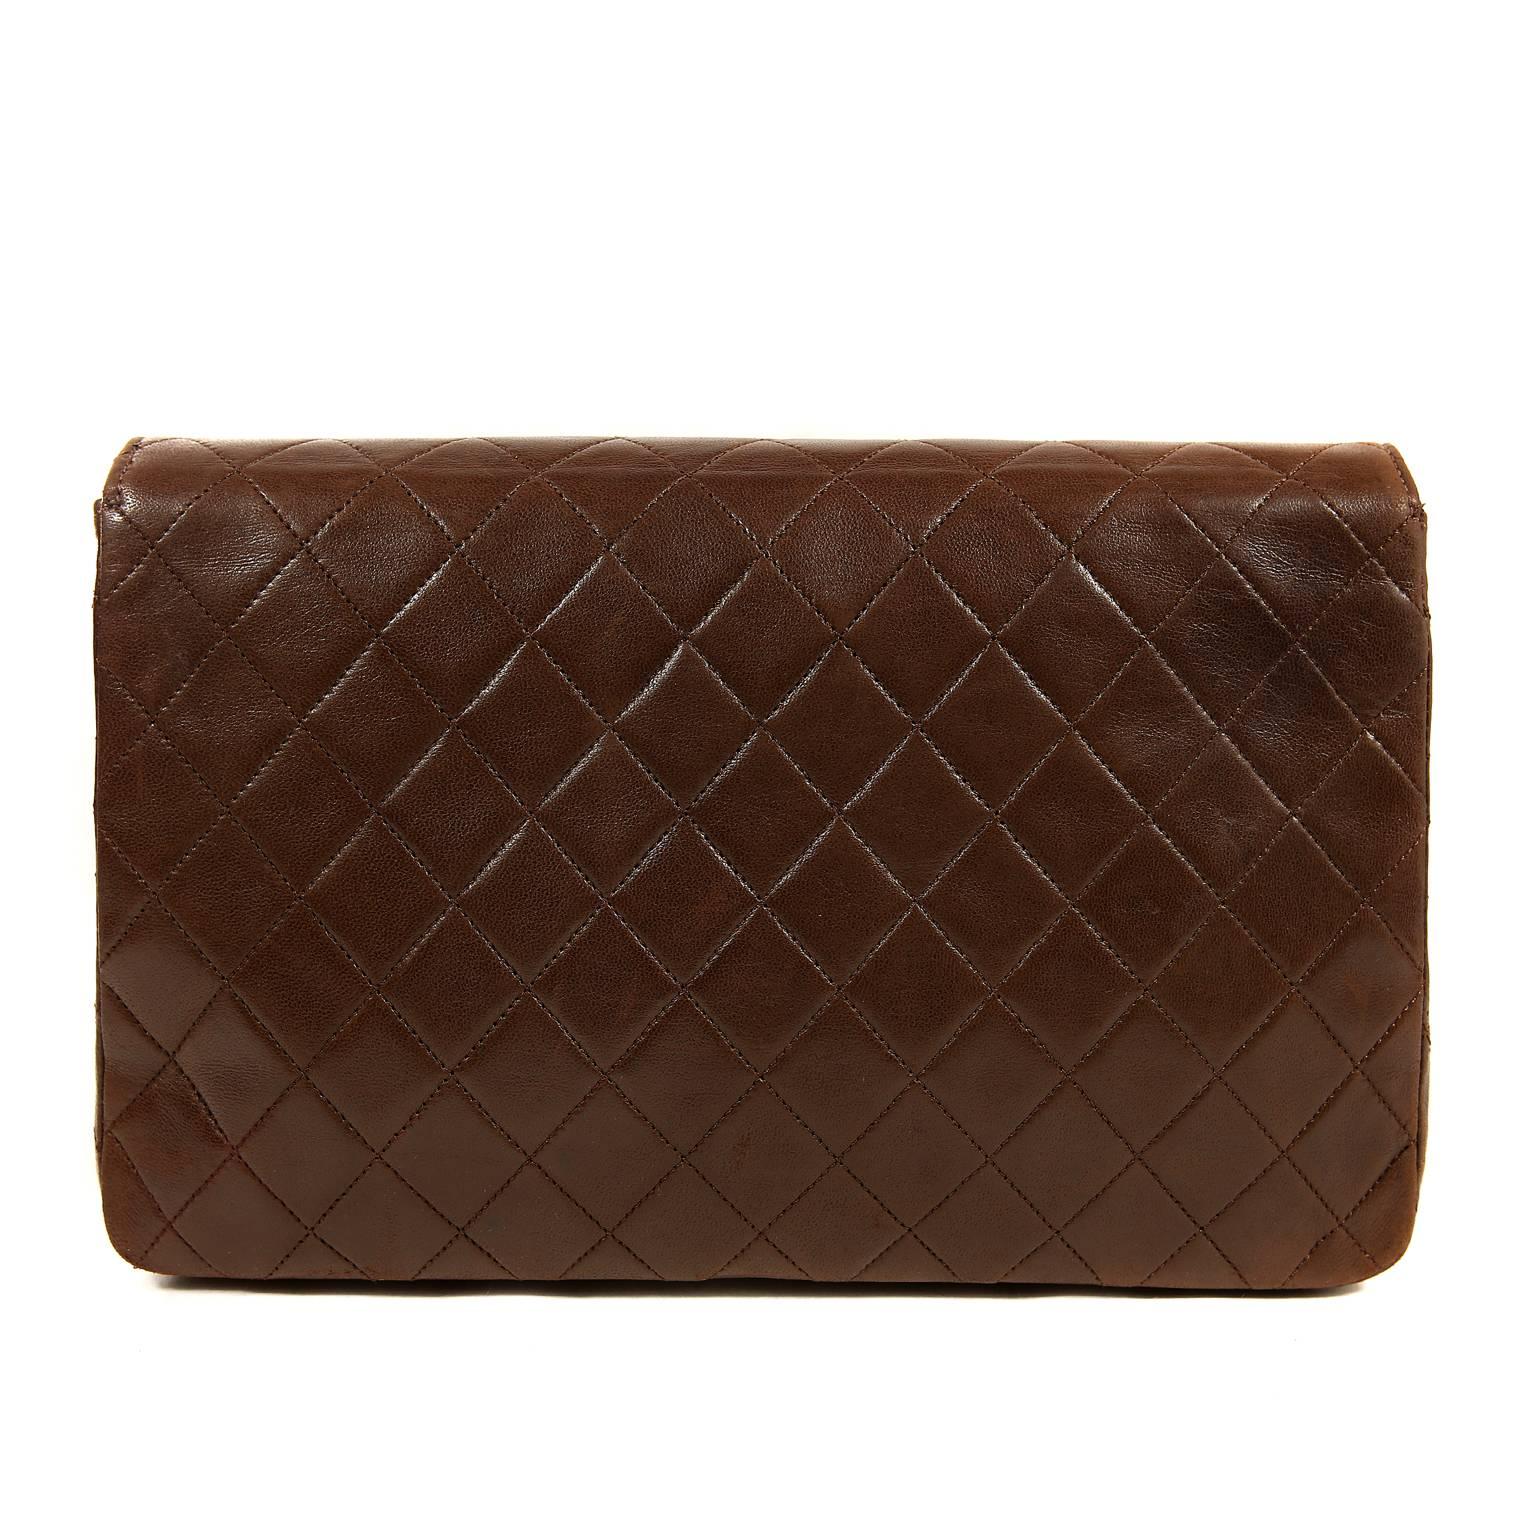 Chanel Brown Leather Medium Flap Bag- Excellent Plus Vintage Condition
  Classic and versatile, the shoulder strap tucks inside for clutch wear.
Rich brown leather is quilted in signature Chanel diamond pattern.  A gold interlocking CC twist lock